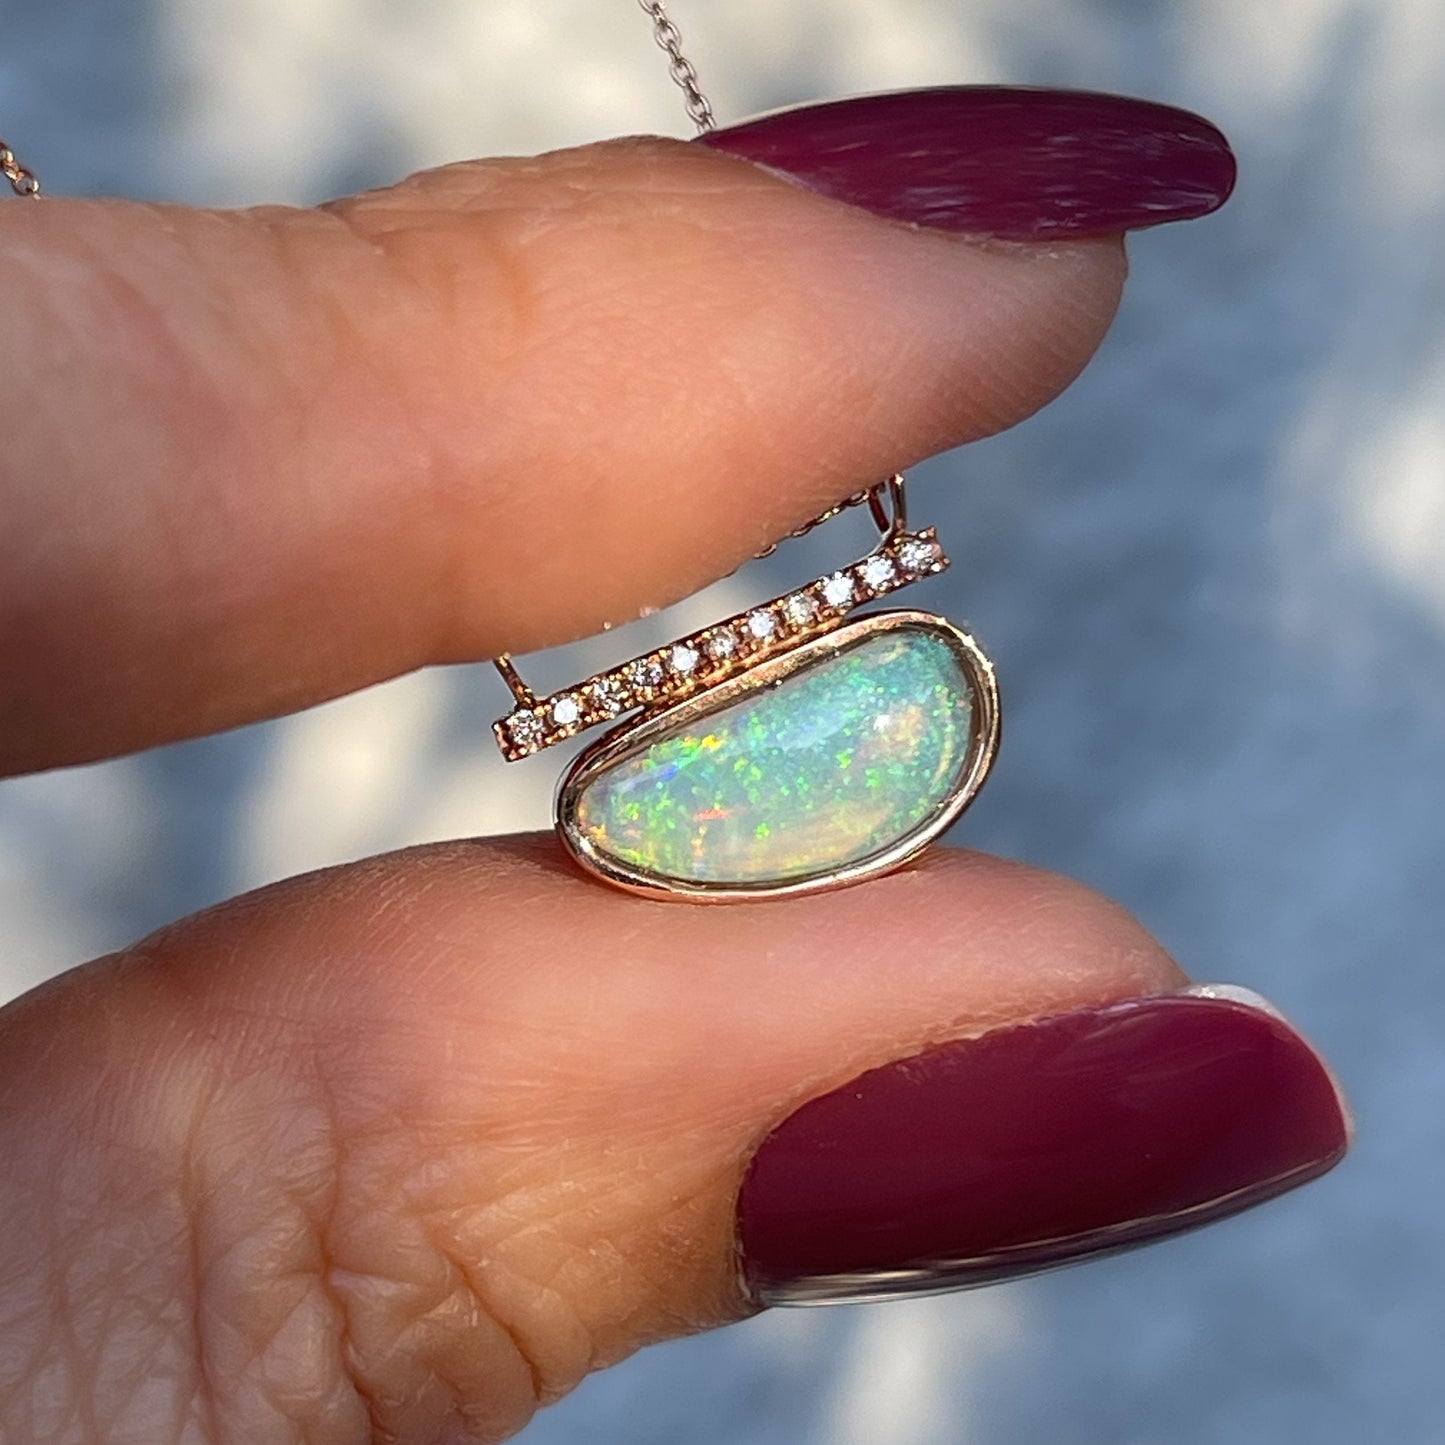 Crystal opal necklace by NIXIN Jewelry held up in sun